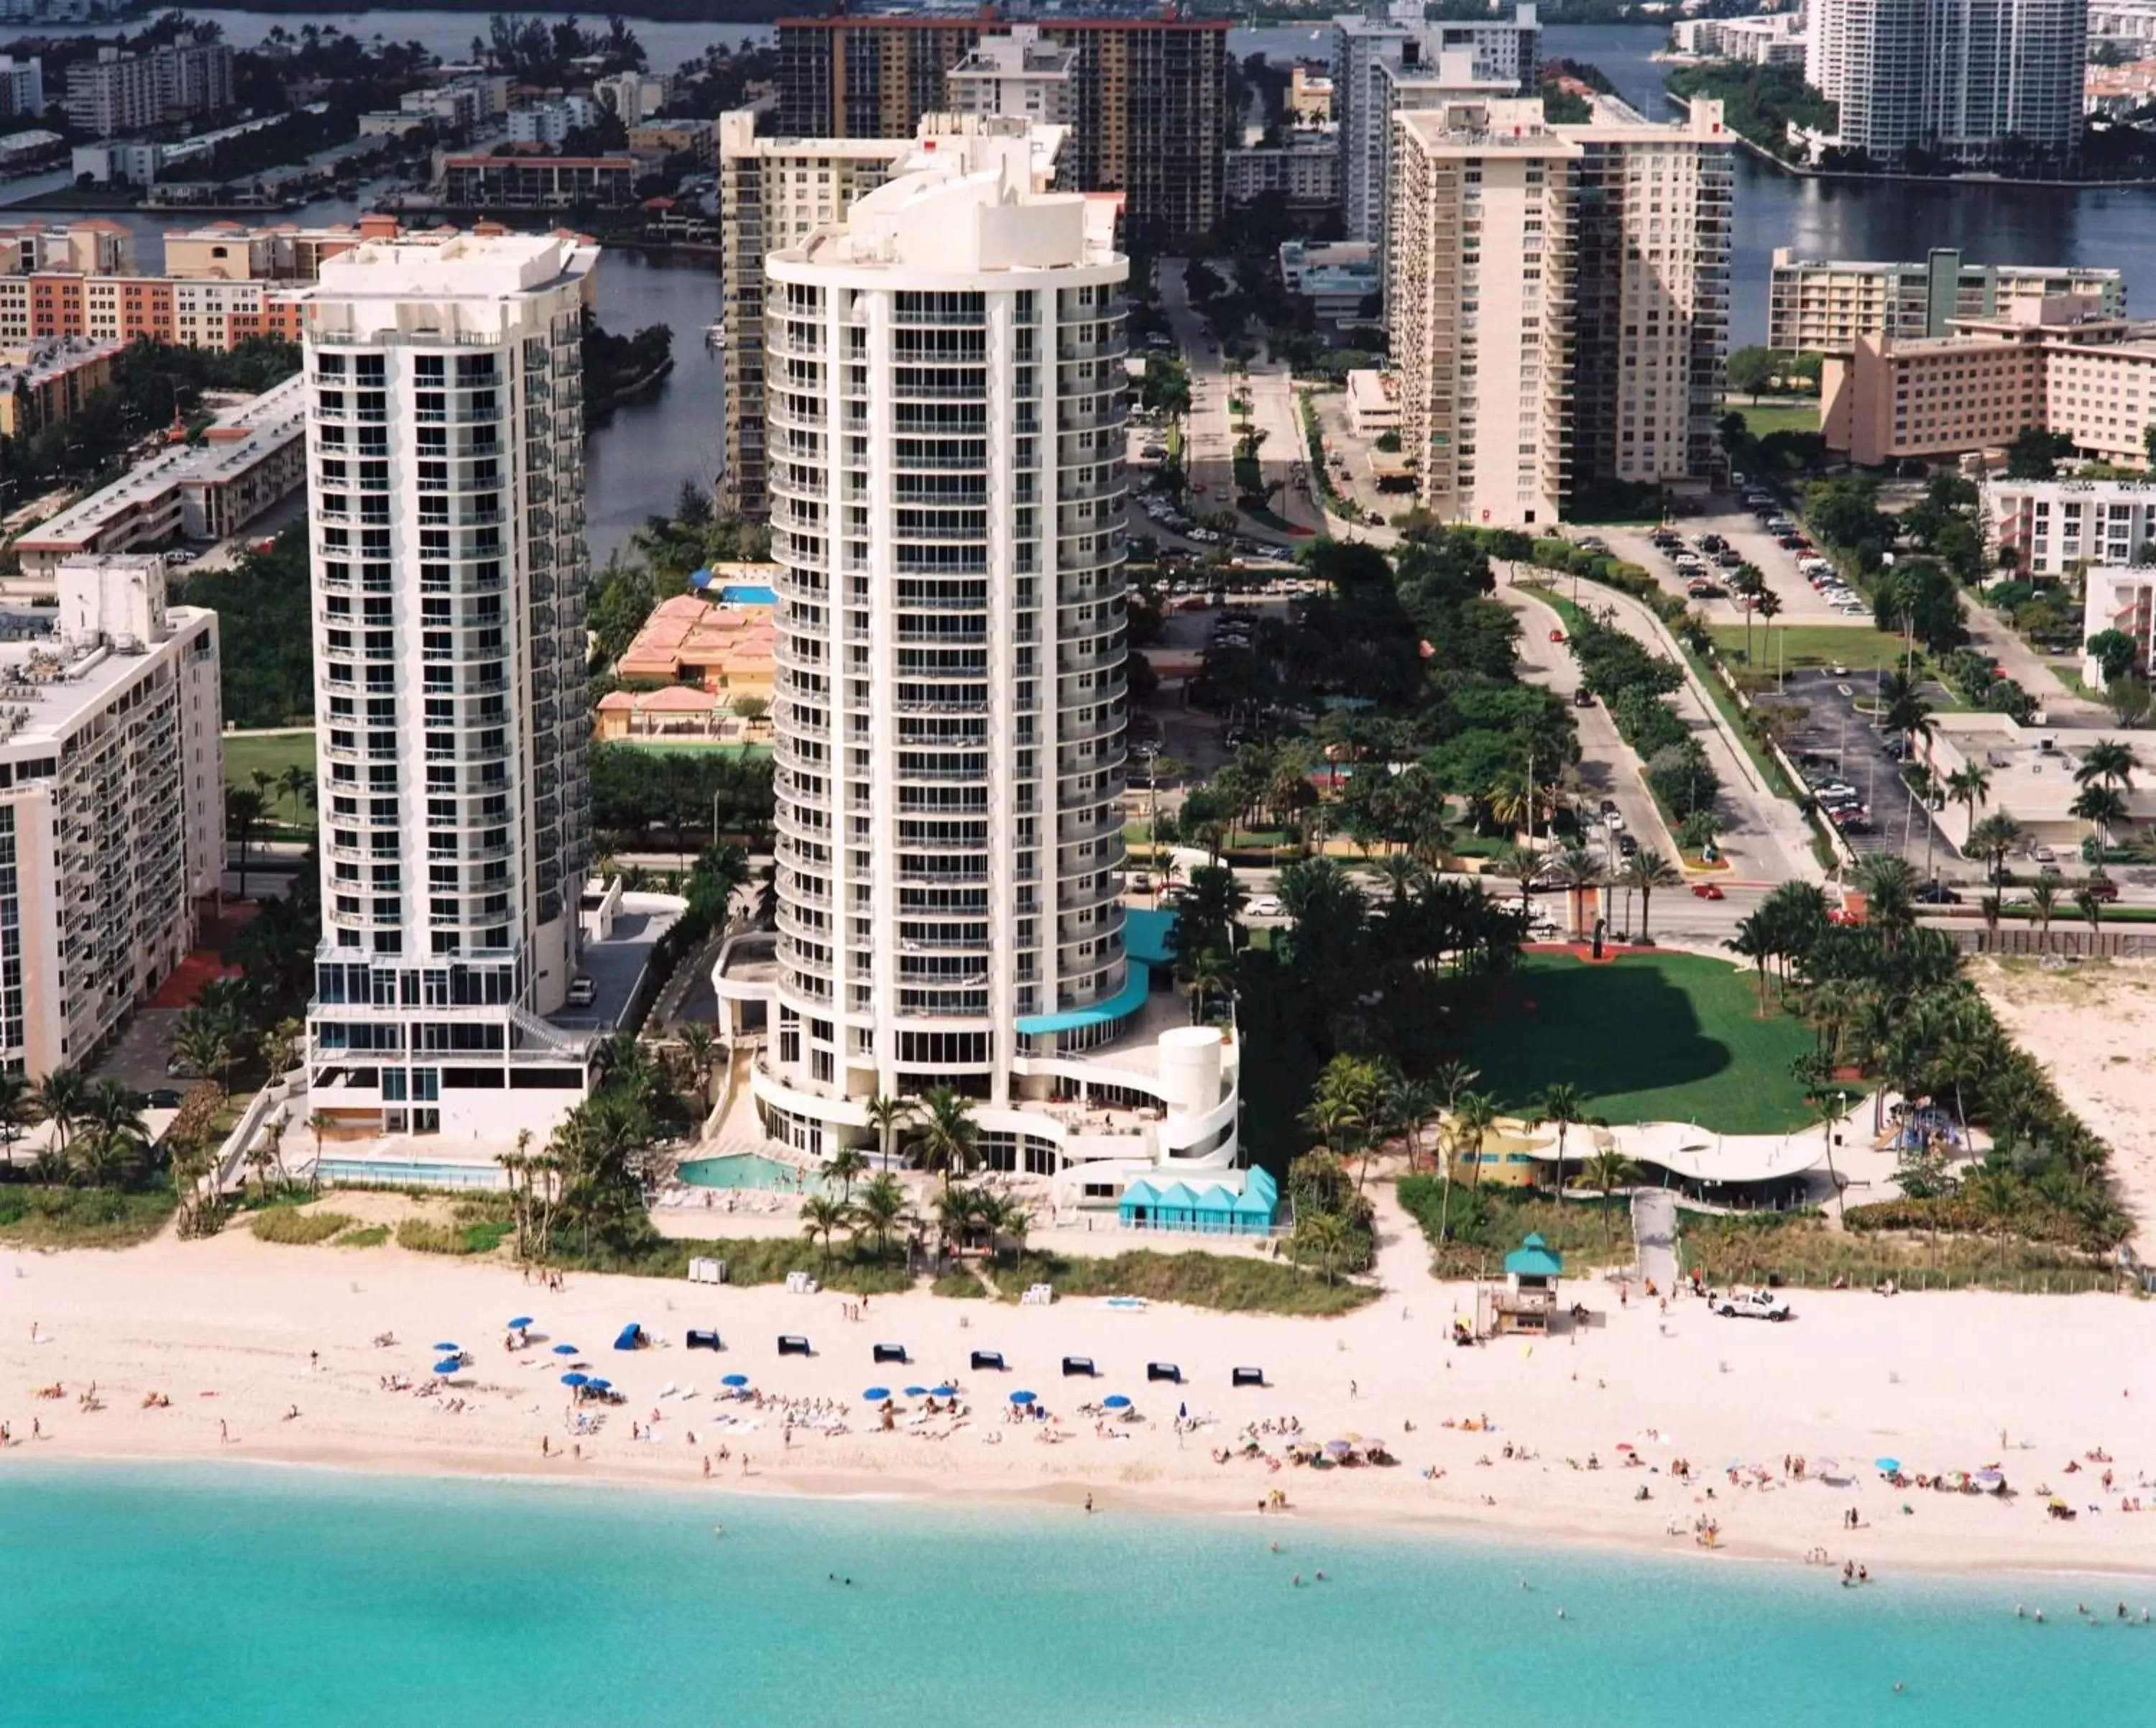 Property building, Bird's-eye View in DoubleTree by Hilton Ocean Point Resort - North Miami Beach